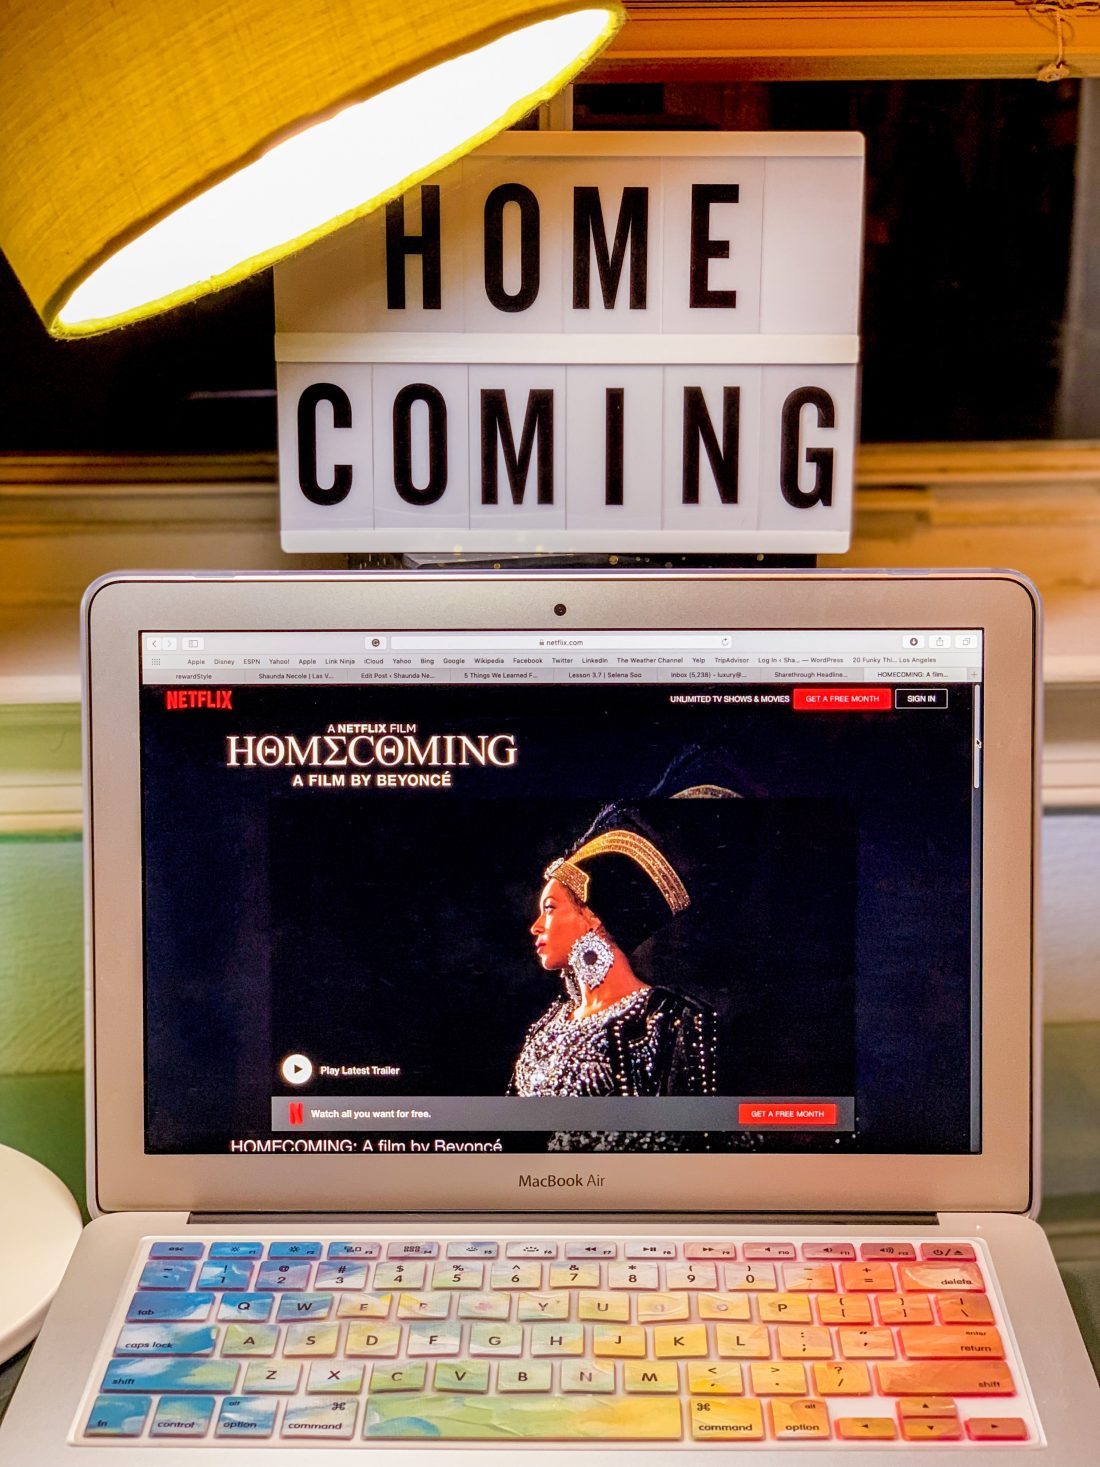 Shaunda Necole on Thrive Global- 5 Things We Learned From Beyoncé's Homecoming Movie